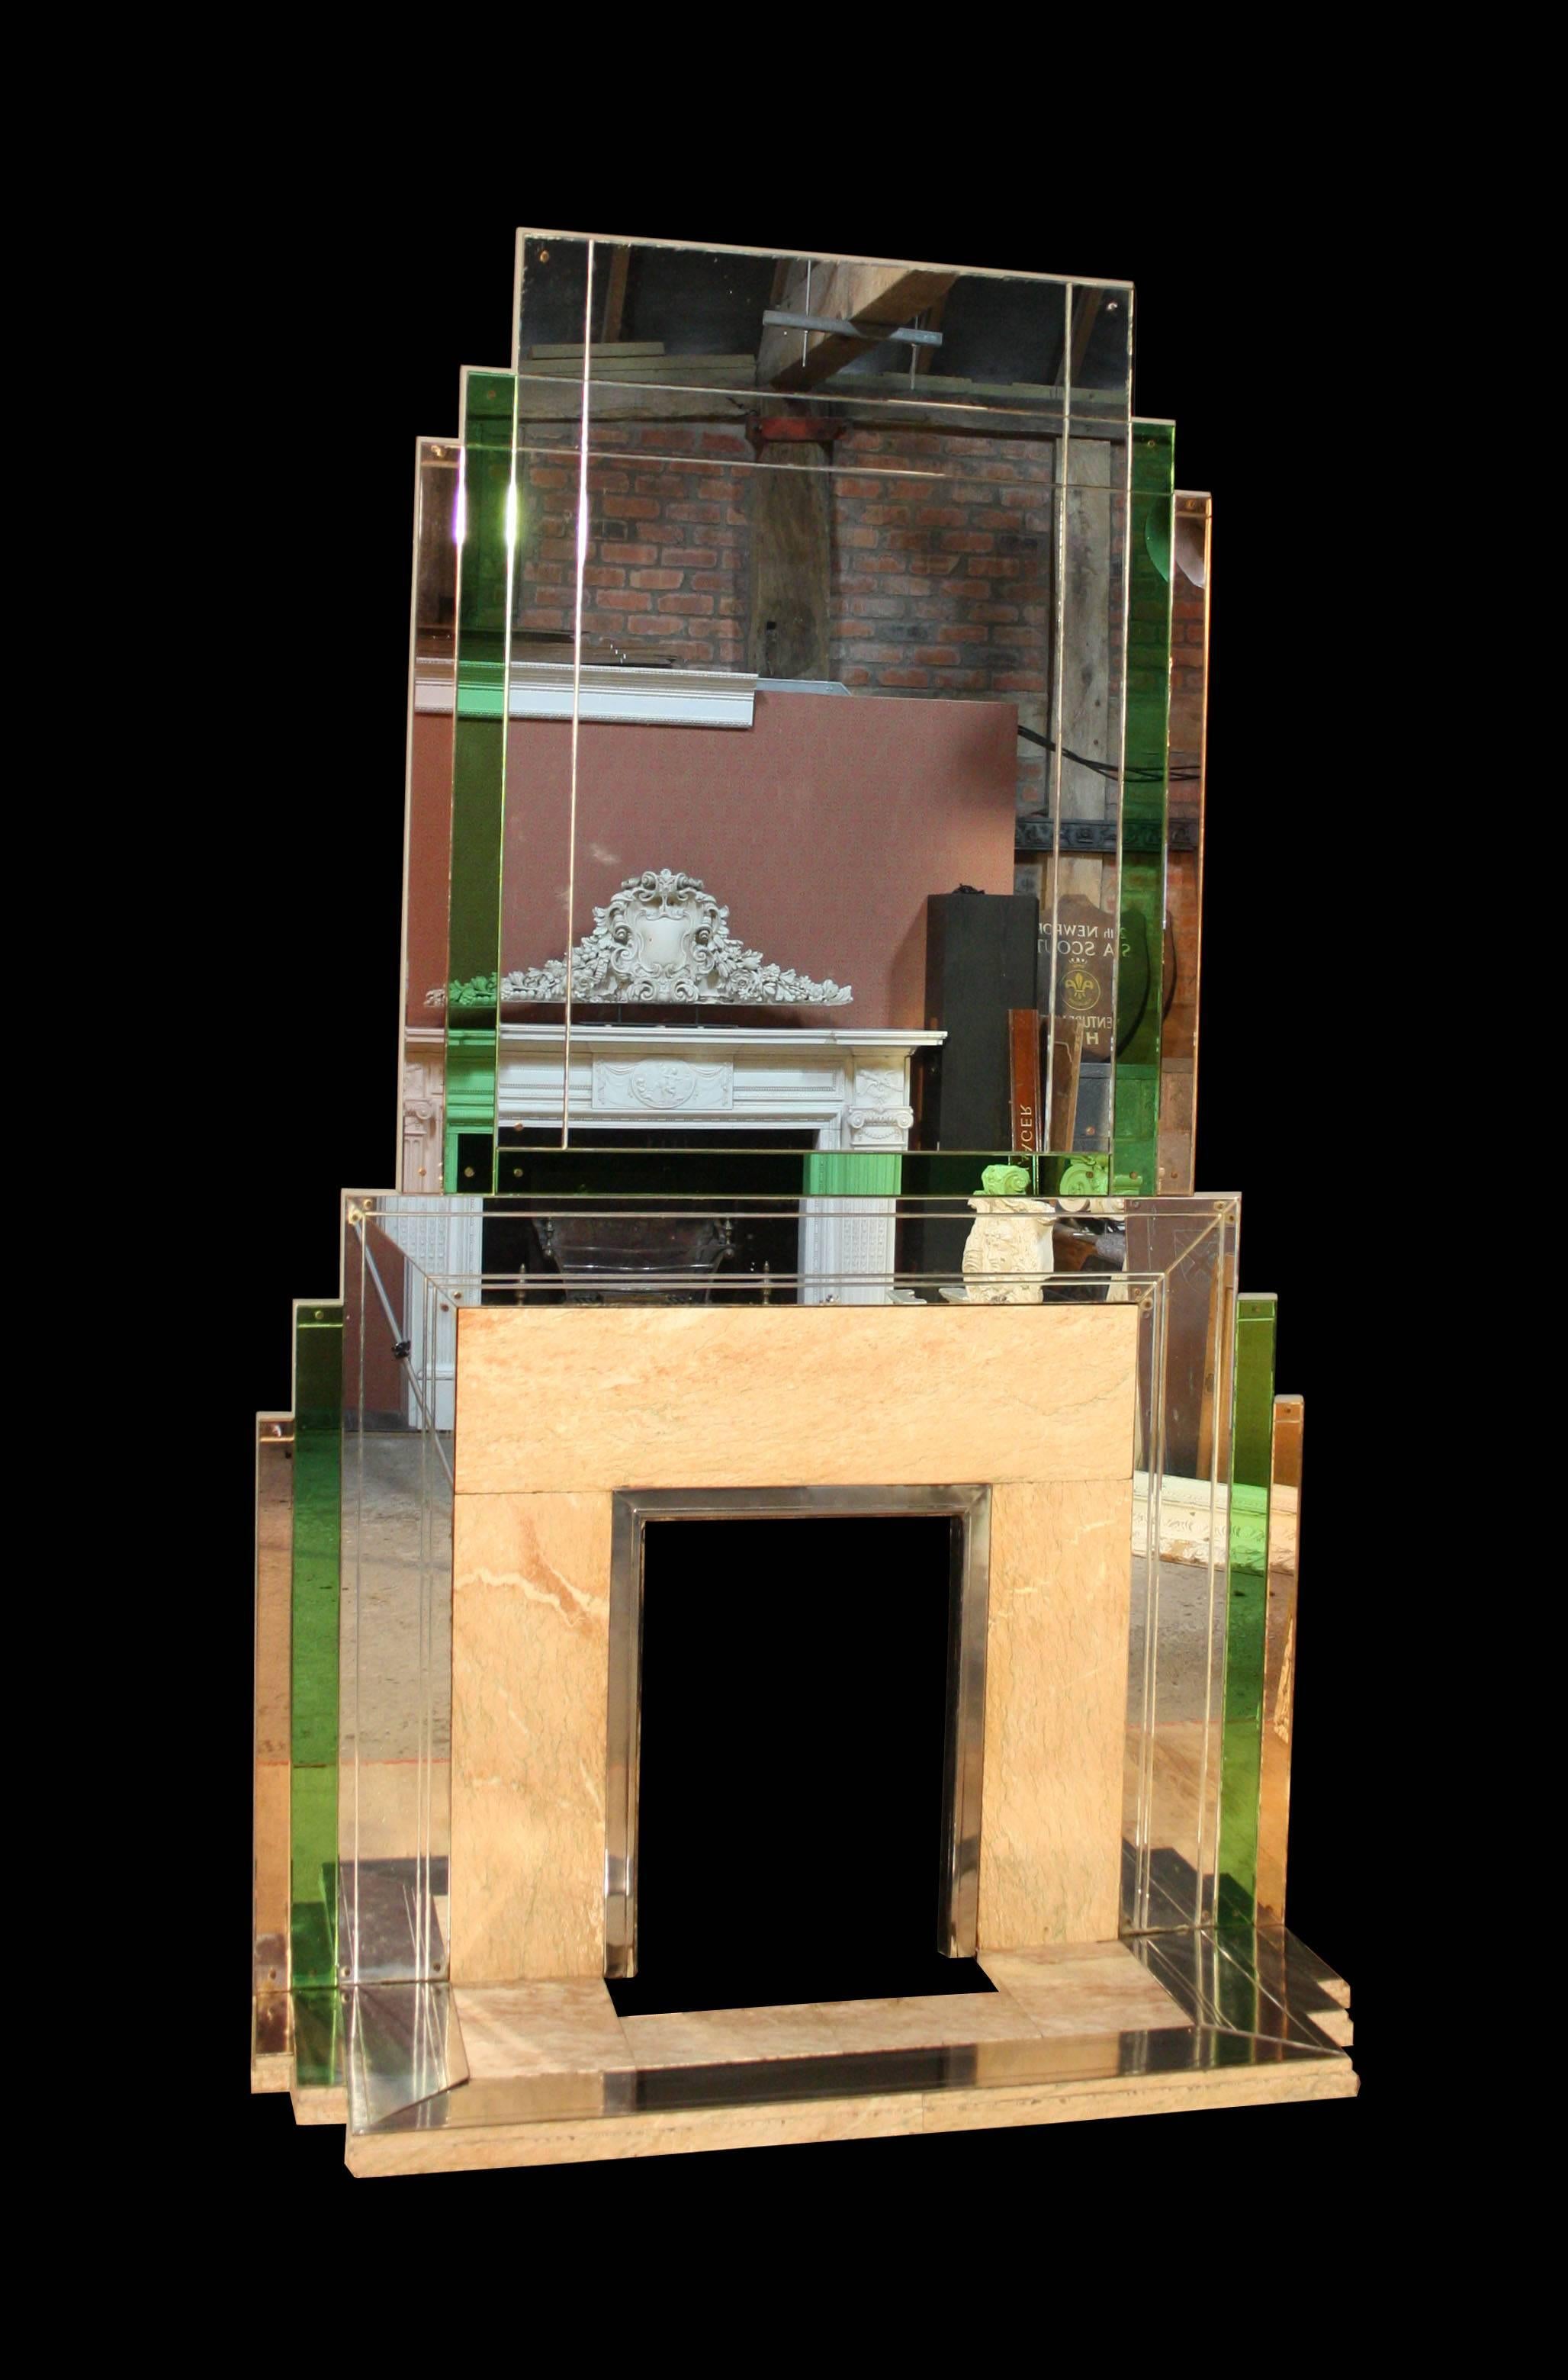 A very rare and impressive Art Deco fire surround by Bratt Colbran
Constructed from silver, peach and green tinted mirror glass attached to a timber frame. With Valance pink (Rose de Valence) marble slips and hearth. The hearth edged in stainless